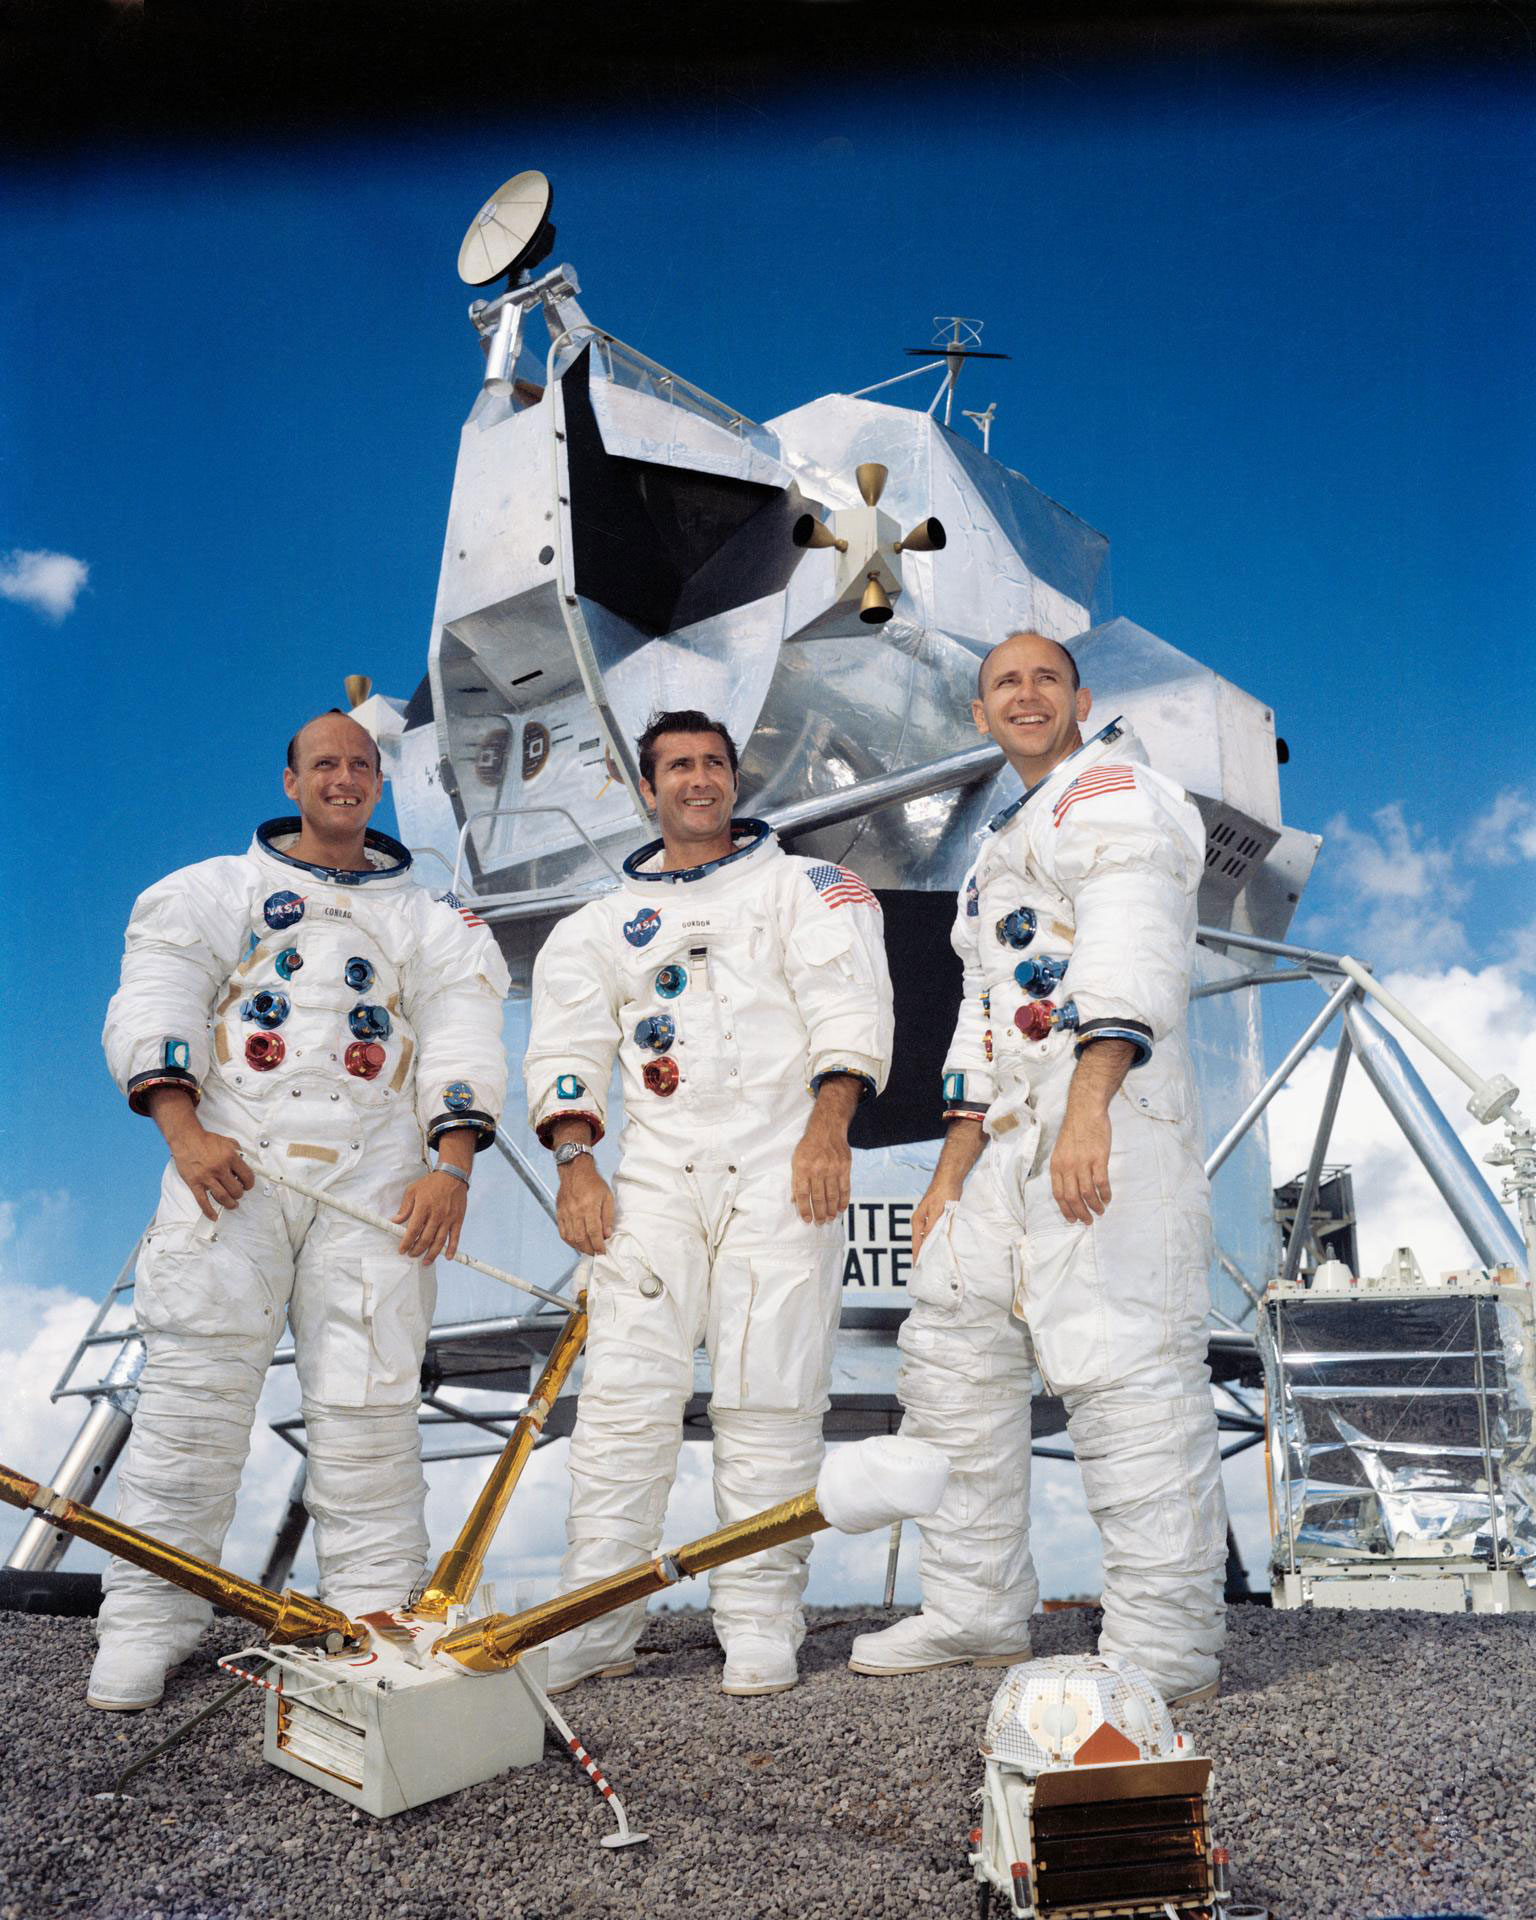 Three men in spacesuits stand in front of a large spacecraft on a sunny day